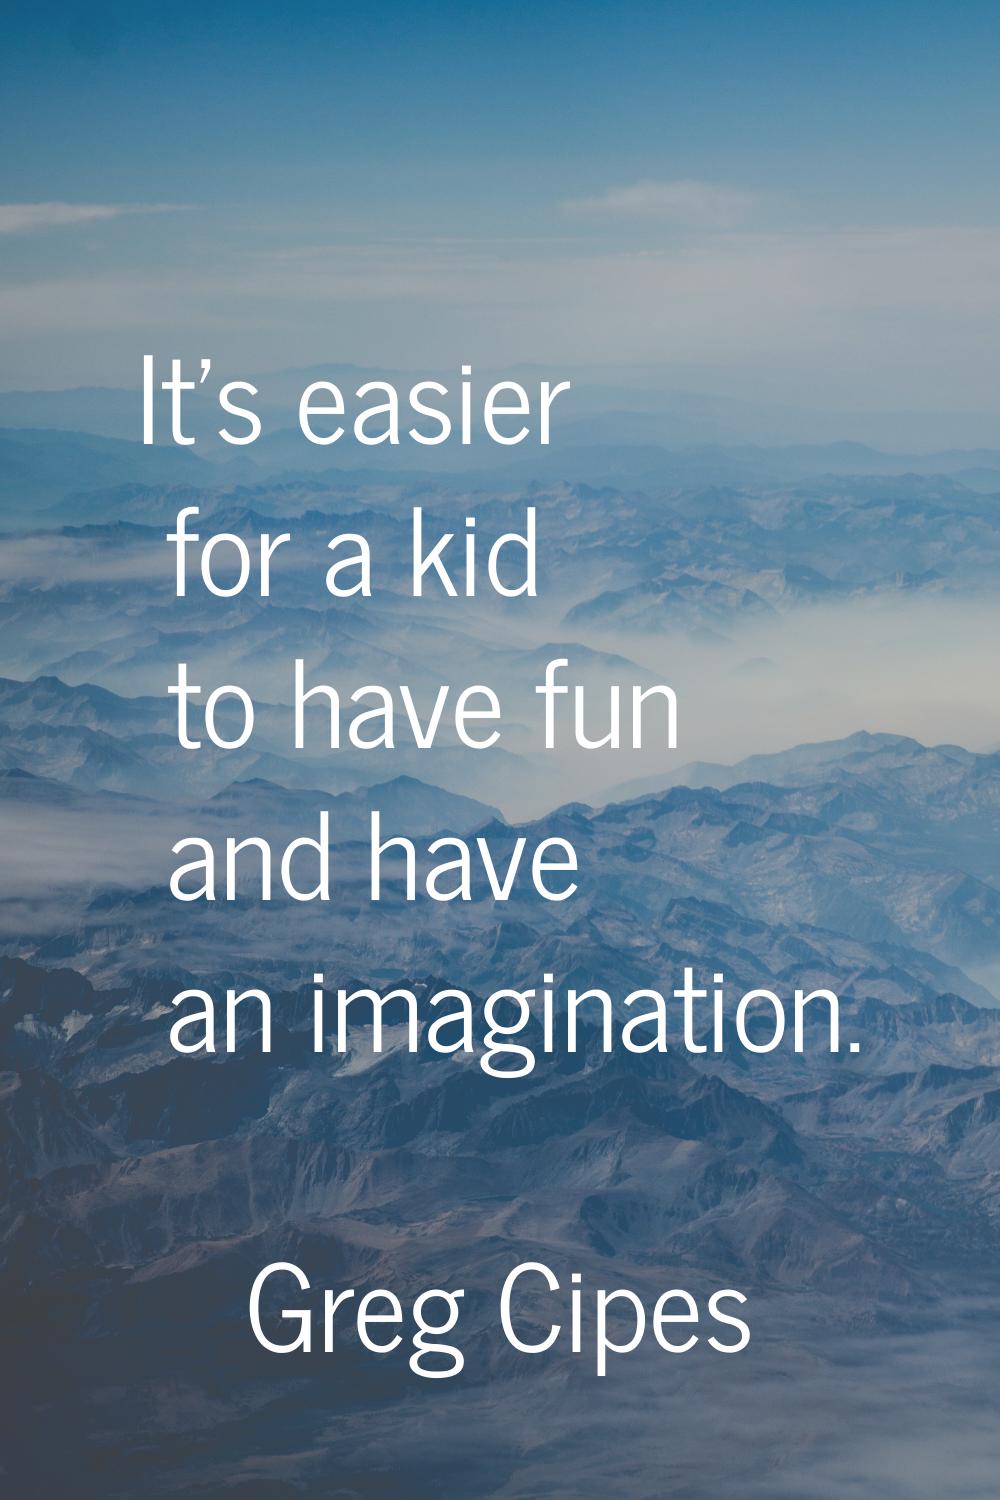 It's easier for a kid to have fun and have an imagination.